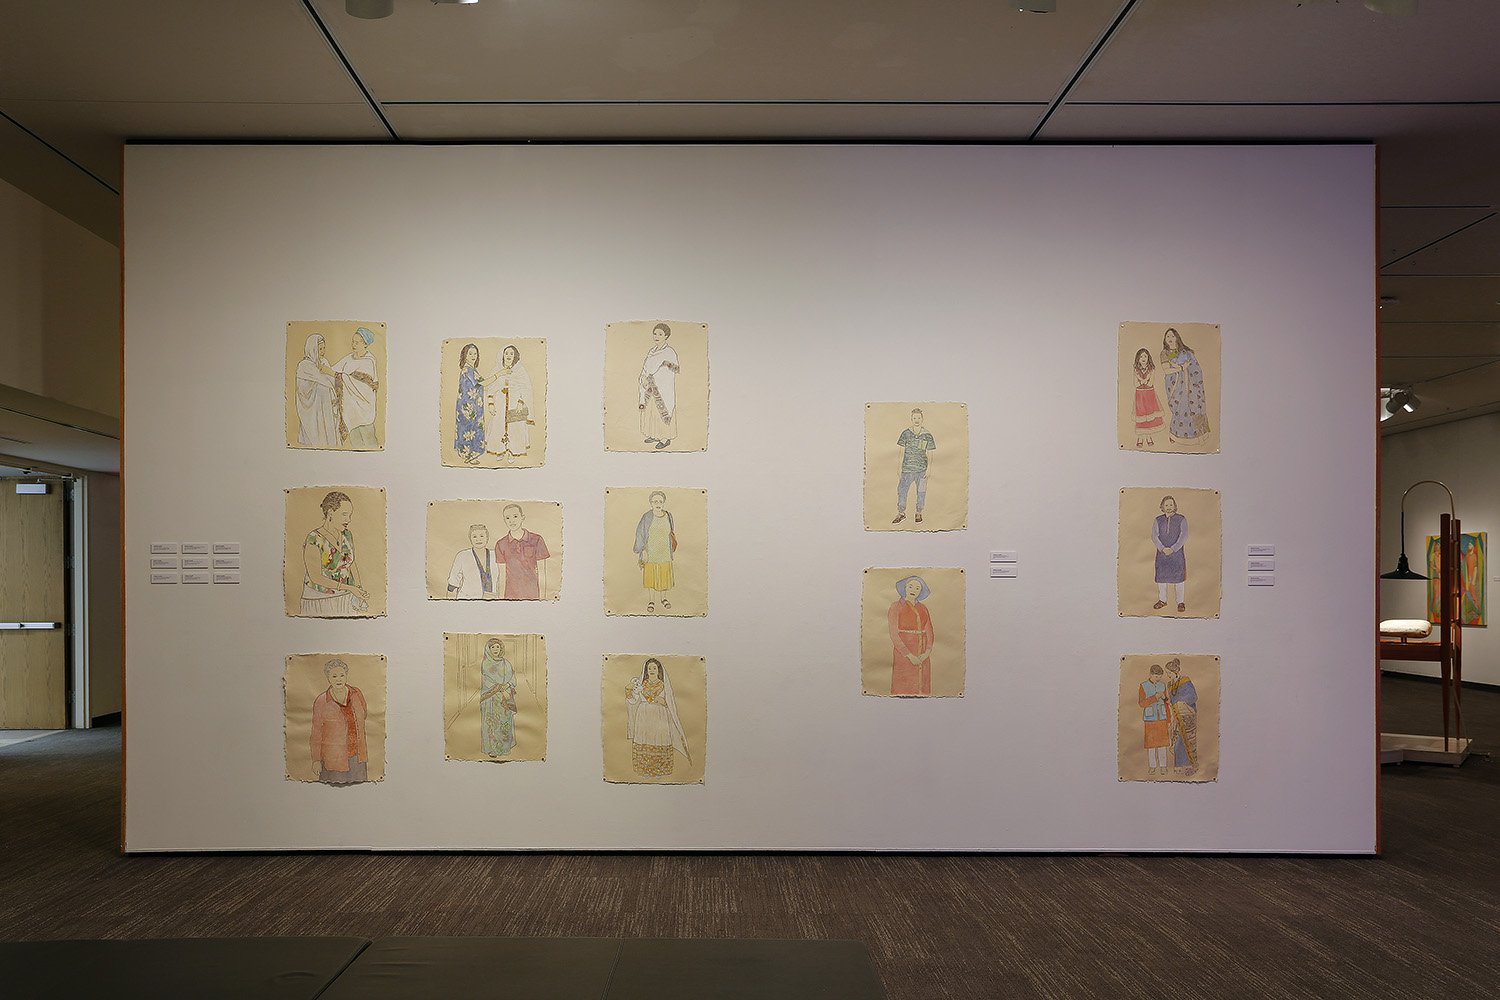  Drawings of the Ethiopian immigrant community (left), French-speaking West African community (center), and the Indian immigrant community (right) in the Puget Sound region.   Part of the 2021 exhibition Present/Tense: Sculpture, Paintings, and Drawi